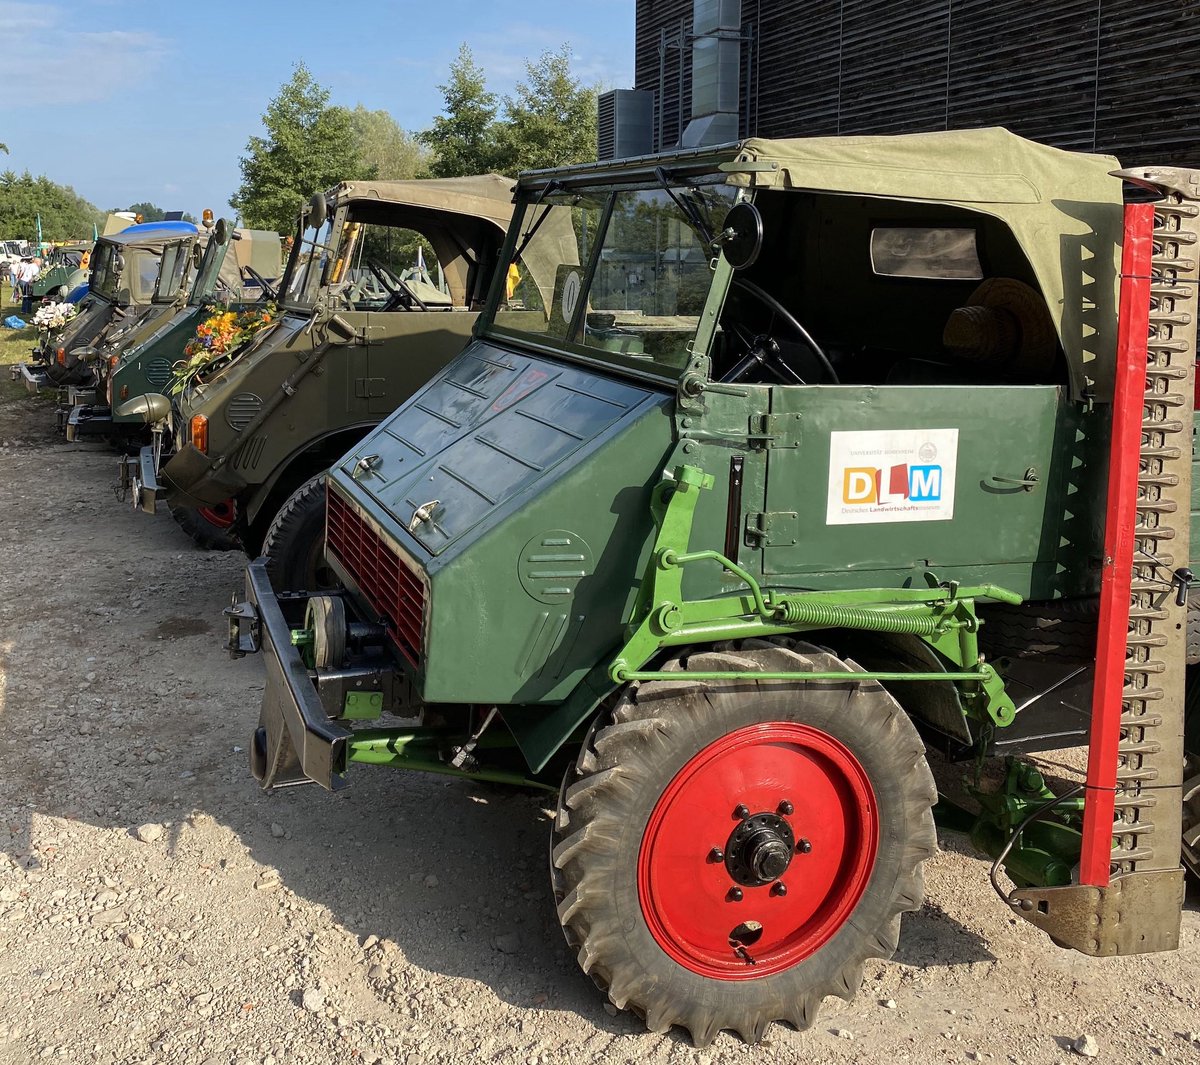 2021: At the anniversary '75 years of Unimog', the Unimog prototype 5 - already started at Erhard&Söhne in 1947 and then completed at Boehringer - could also be admired. 

#mercedesbenz #gaggenau #unimog #daimle #unimogfan #unimogcommunity #unimogmuseum #landwirtschaftsmuseum